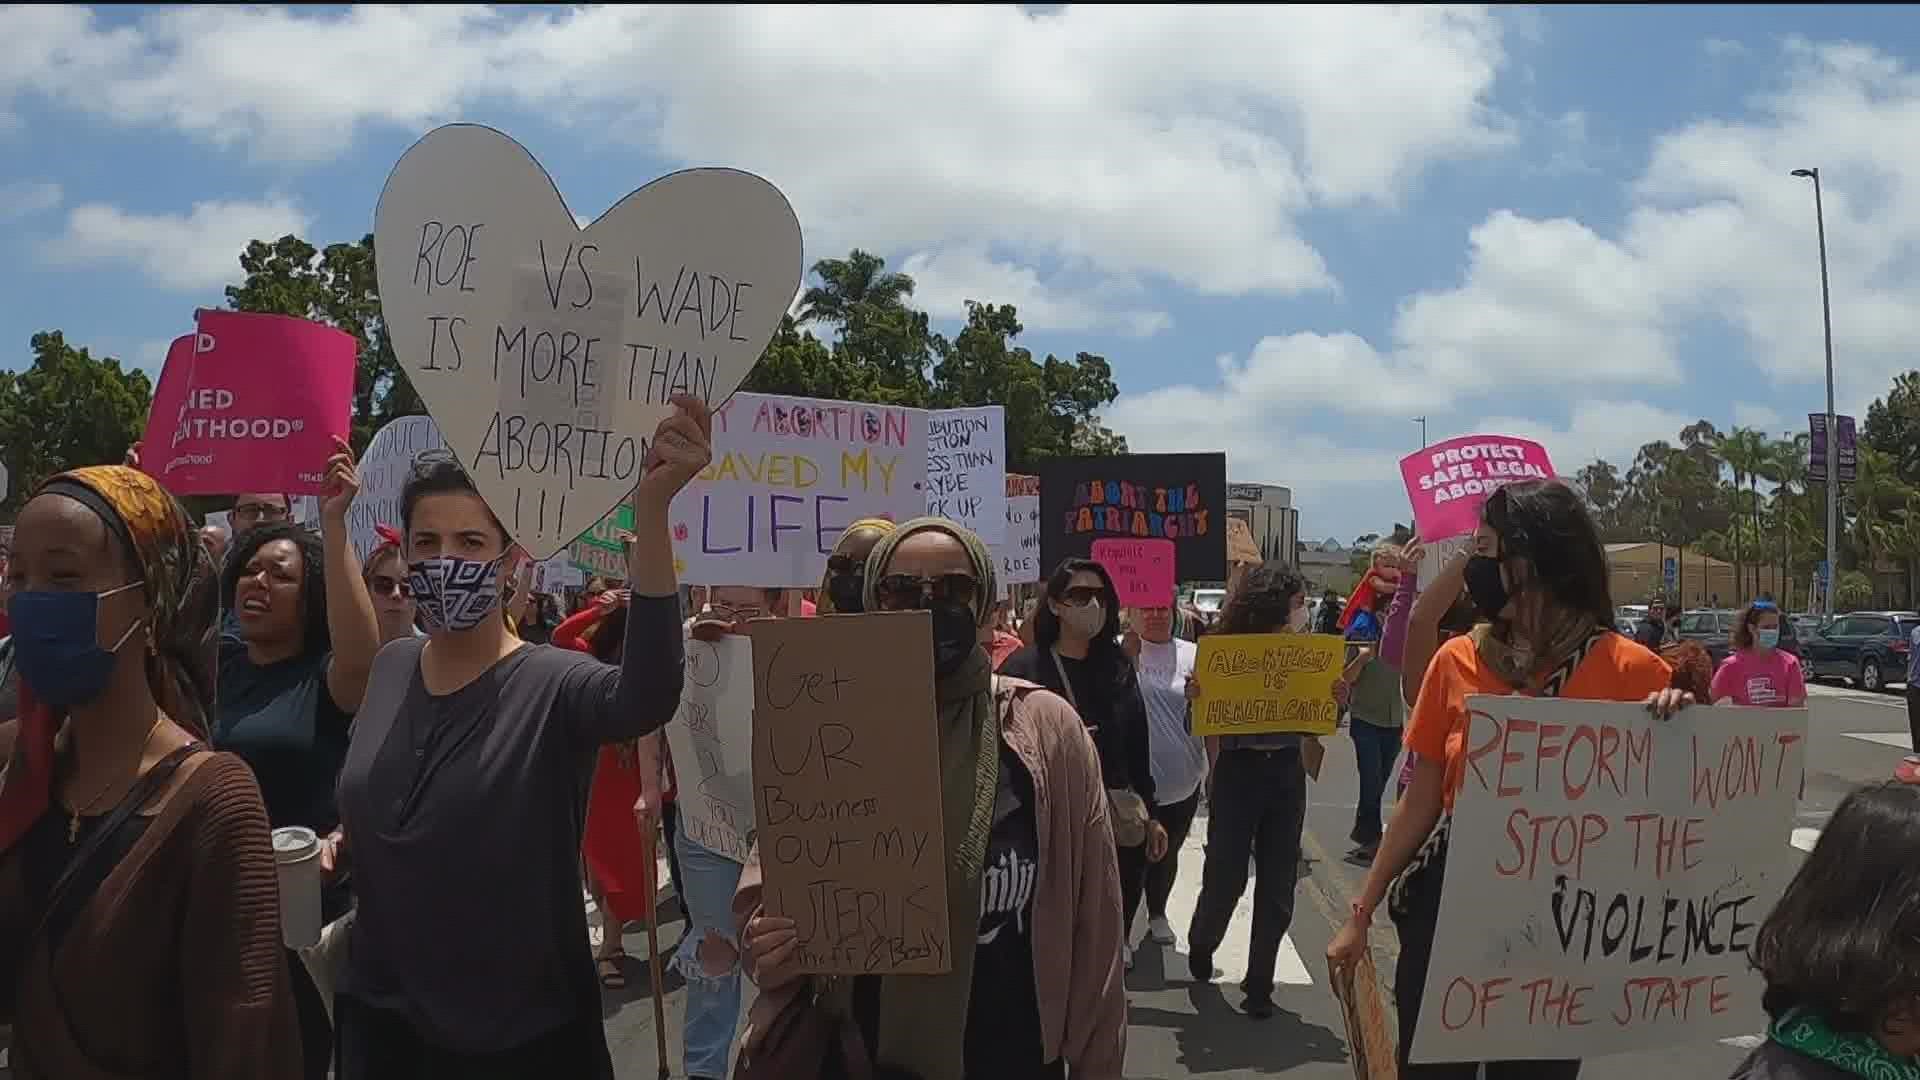 “My body, my choice,” Pro-choice protestors spent their Sunday in Balboa park protested in response to the leaked draft opinion suggesting to overturn Roe vs. Wade.